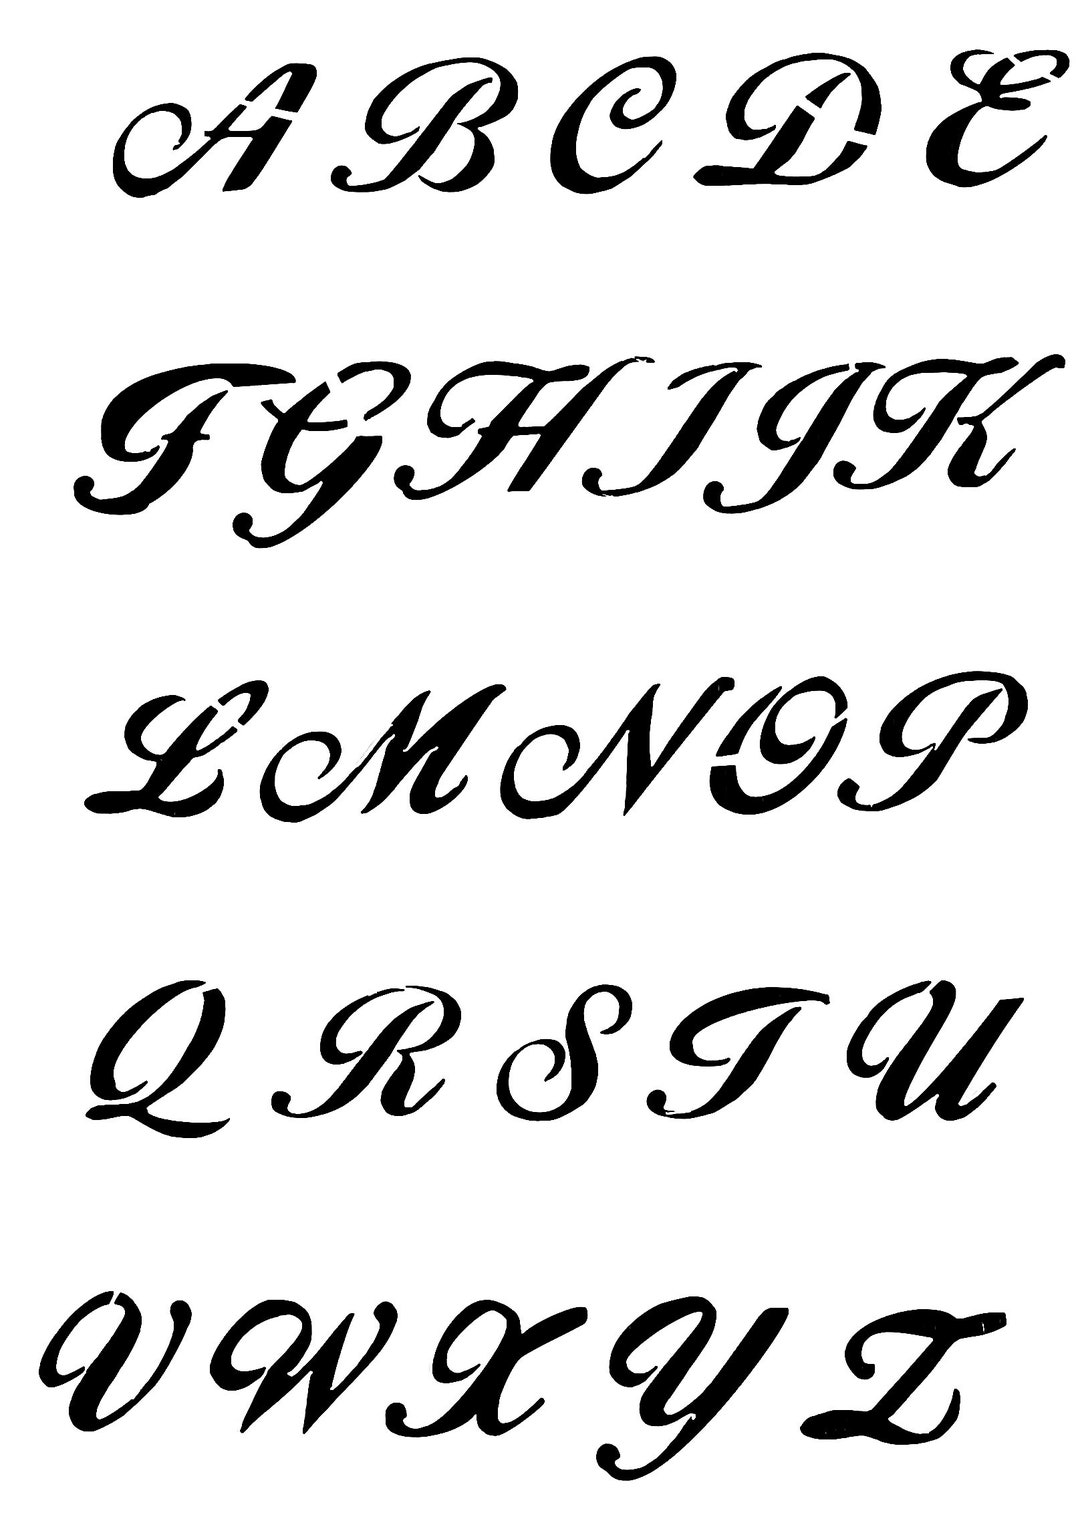 Alphabet stencils font n.15 - Uppercase. Individual letters A to Z